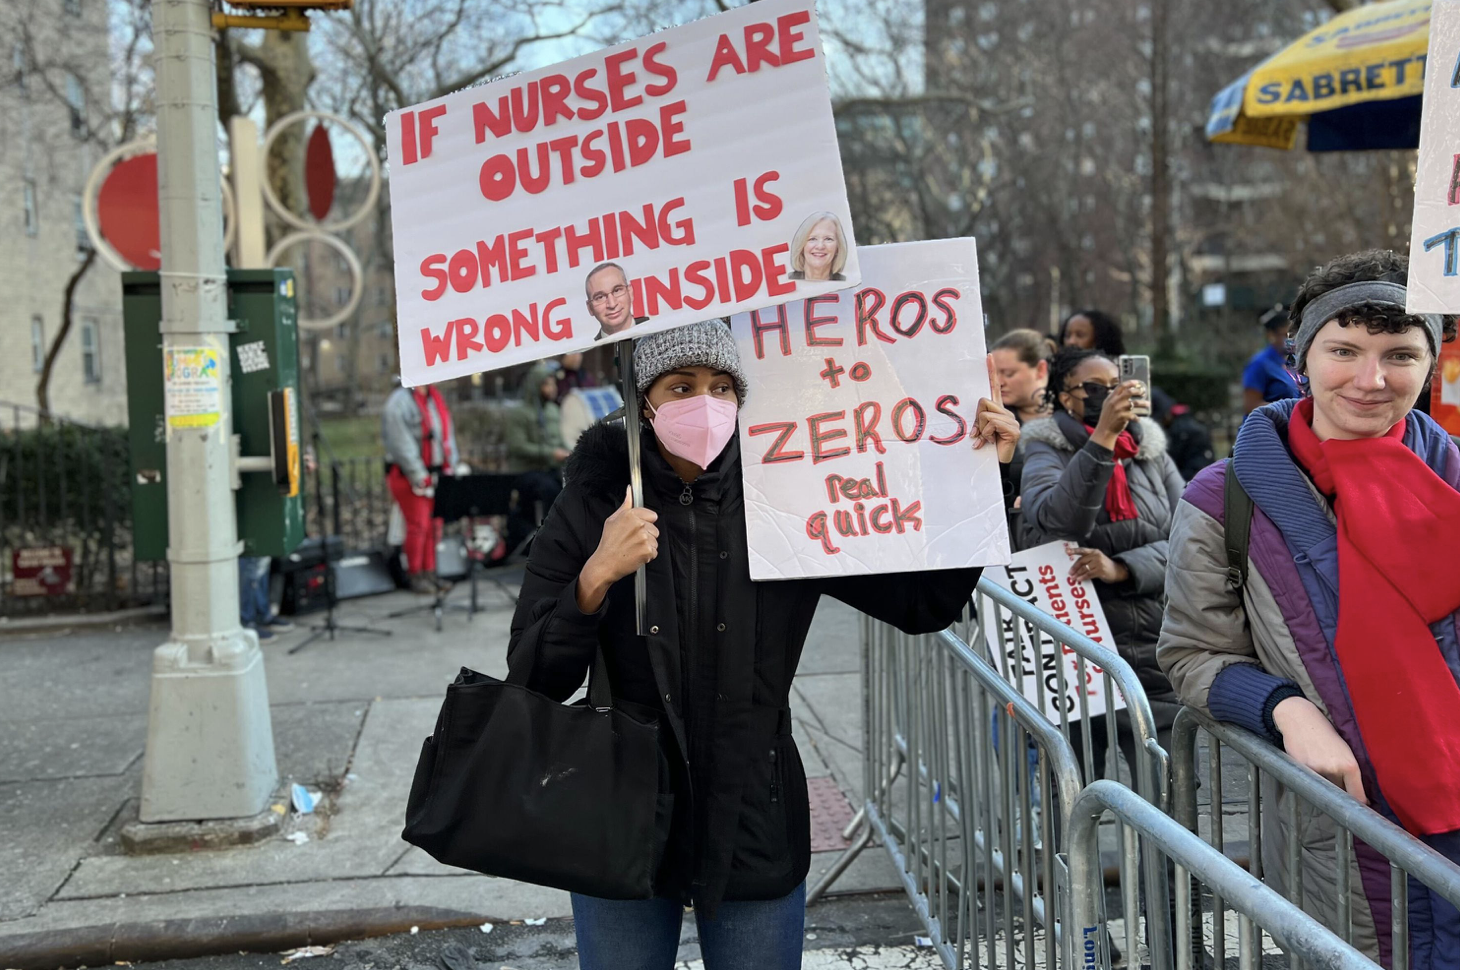 Hospitals Scramble to Find Medical Workers as Nurses Strike - newsjustin.press - THECITY